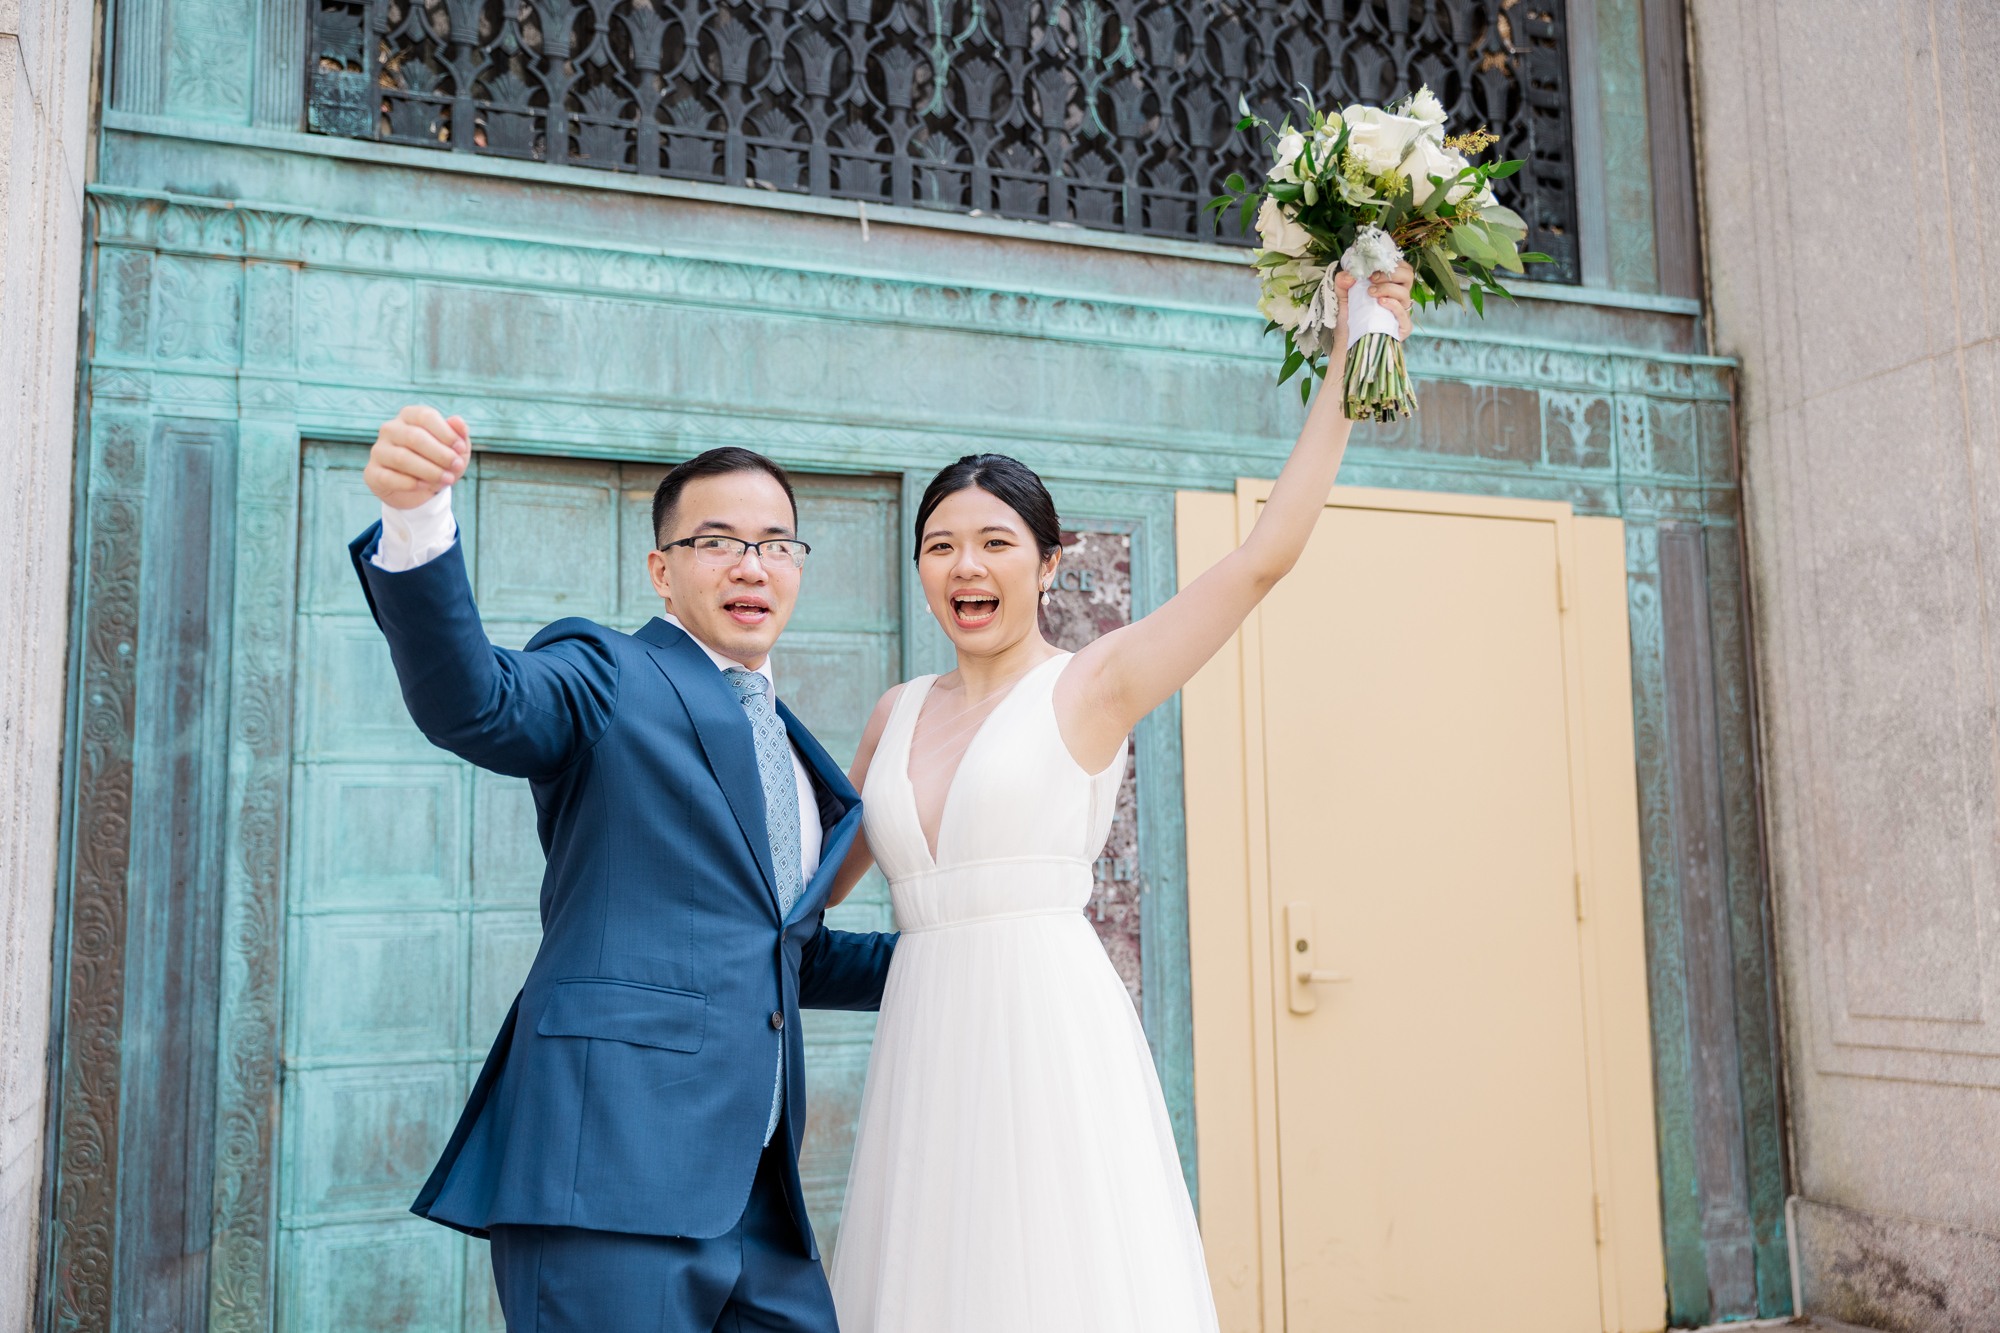 Charming Elopement Photos in DUMBO and Central Park New York